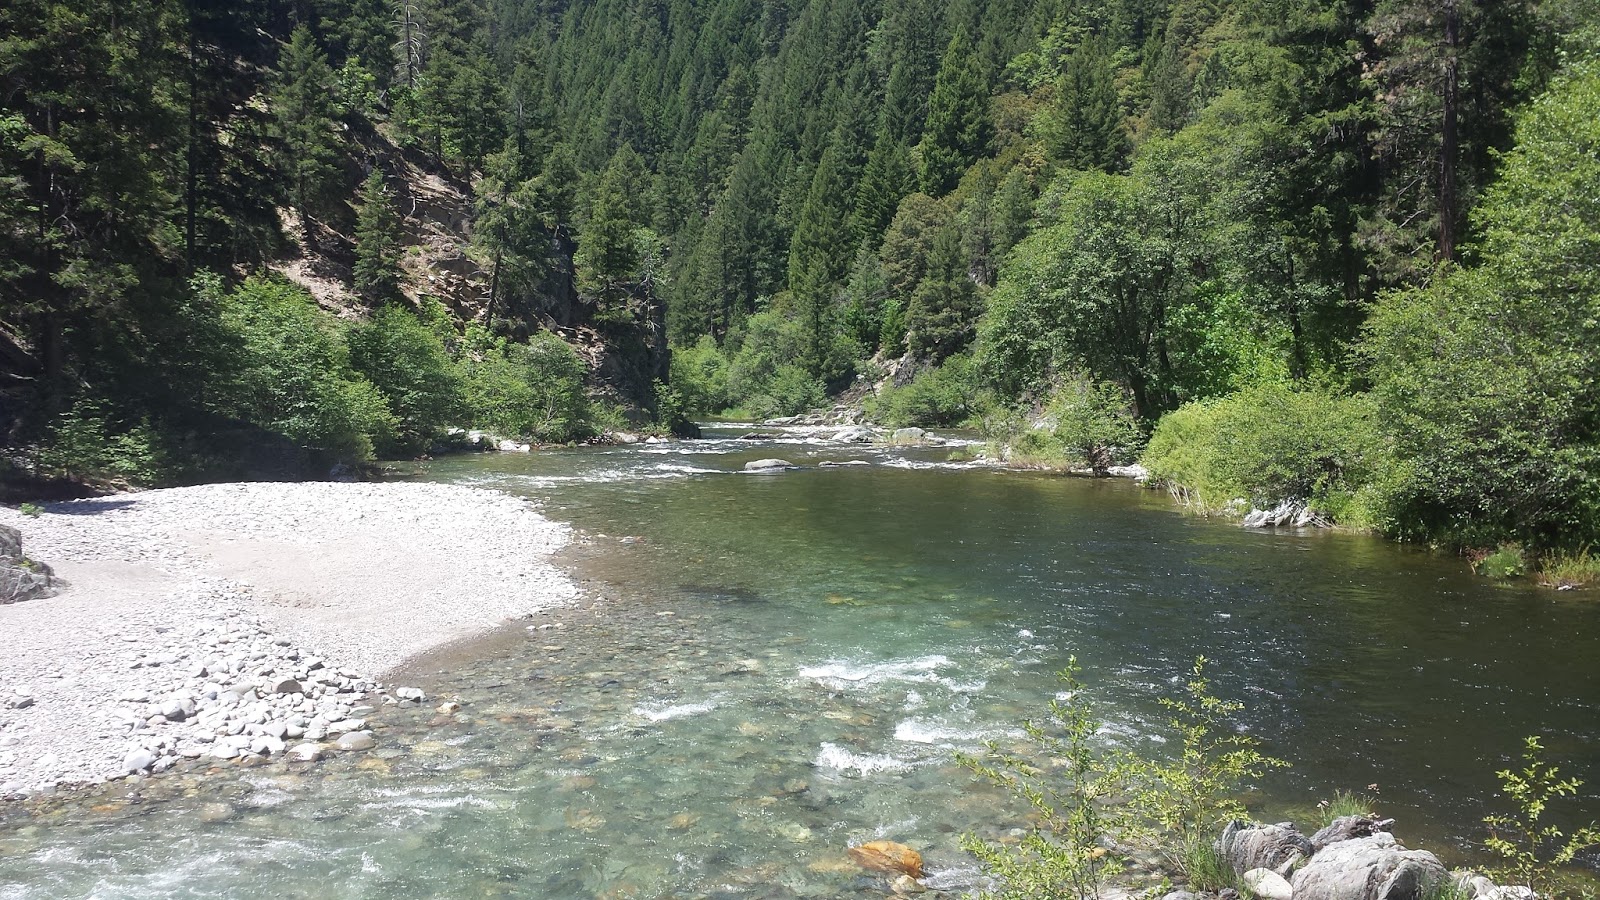 How Do I Fish This: Middle Fork Feather River